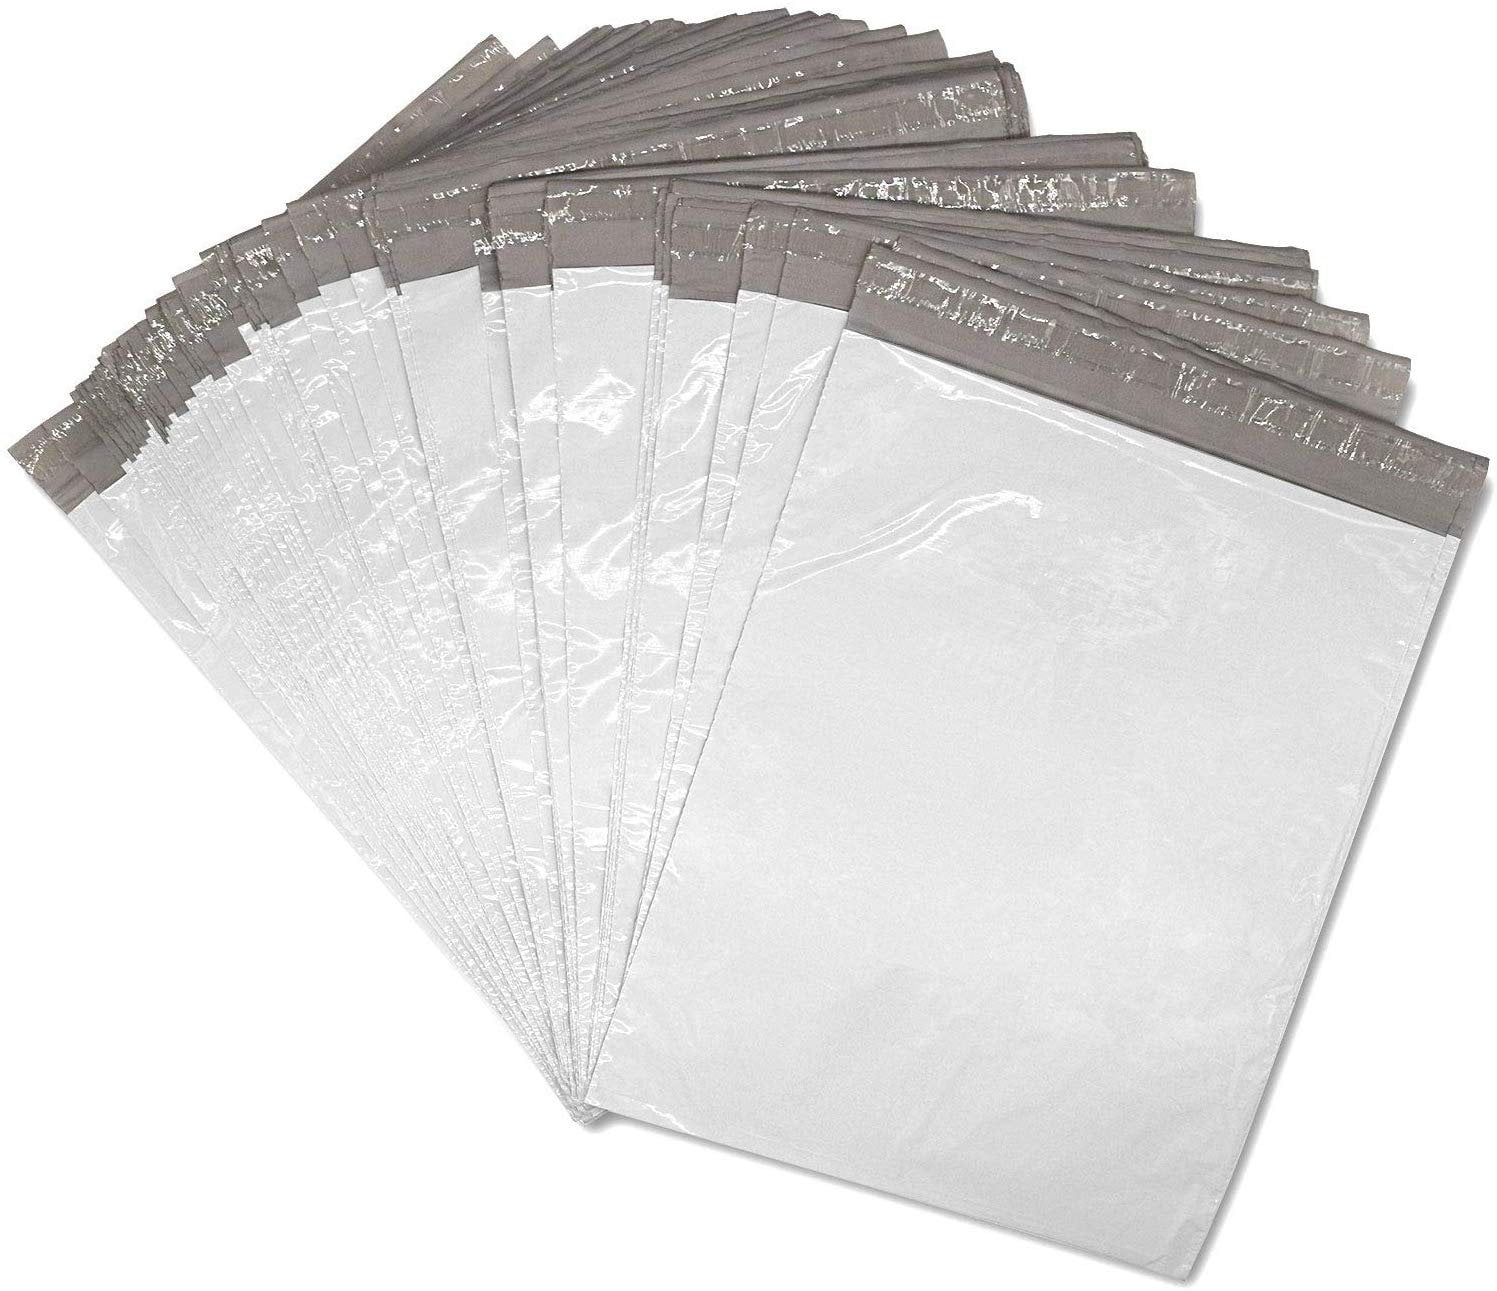  Poly  Mailer  Bags Plain Mailers 10x13 100 Pcs White with 